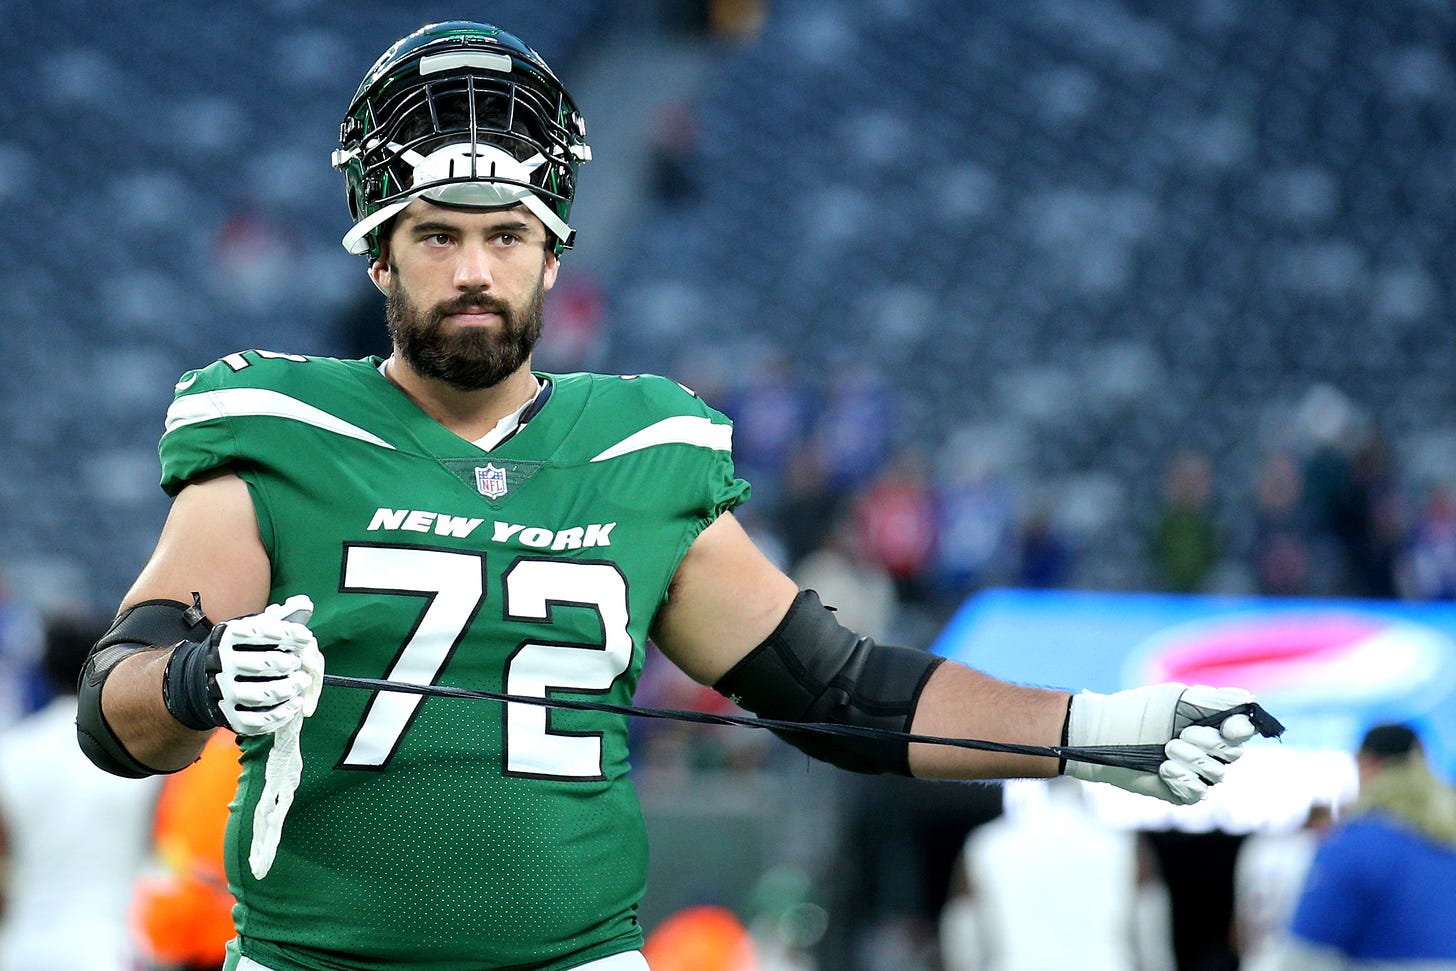 Laurent Duvernay-Tardif loving Jets chance after year on front lines  fighting COVID